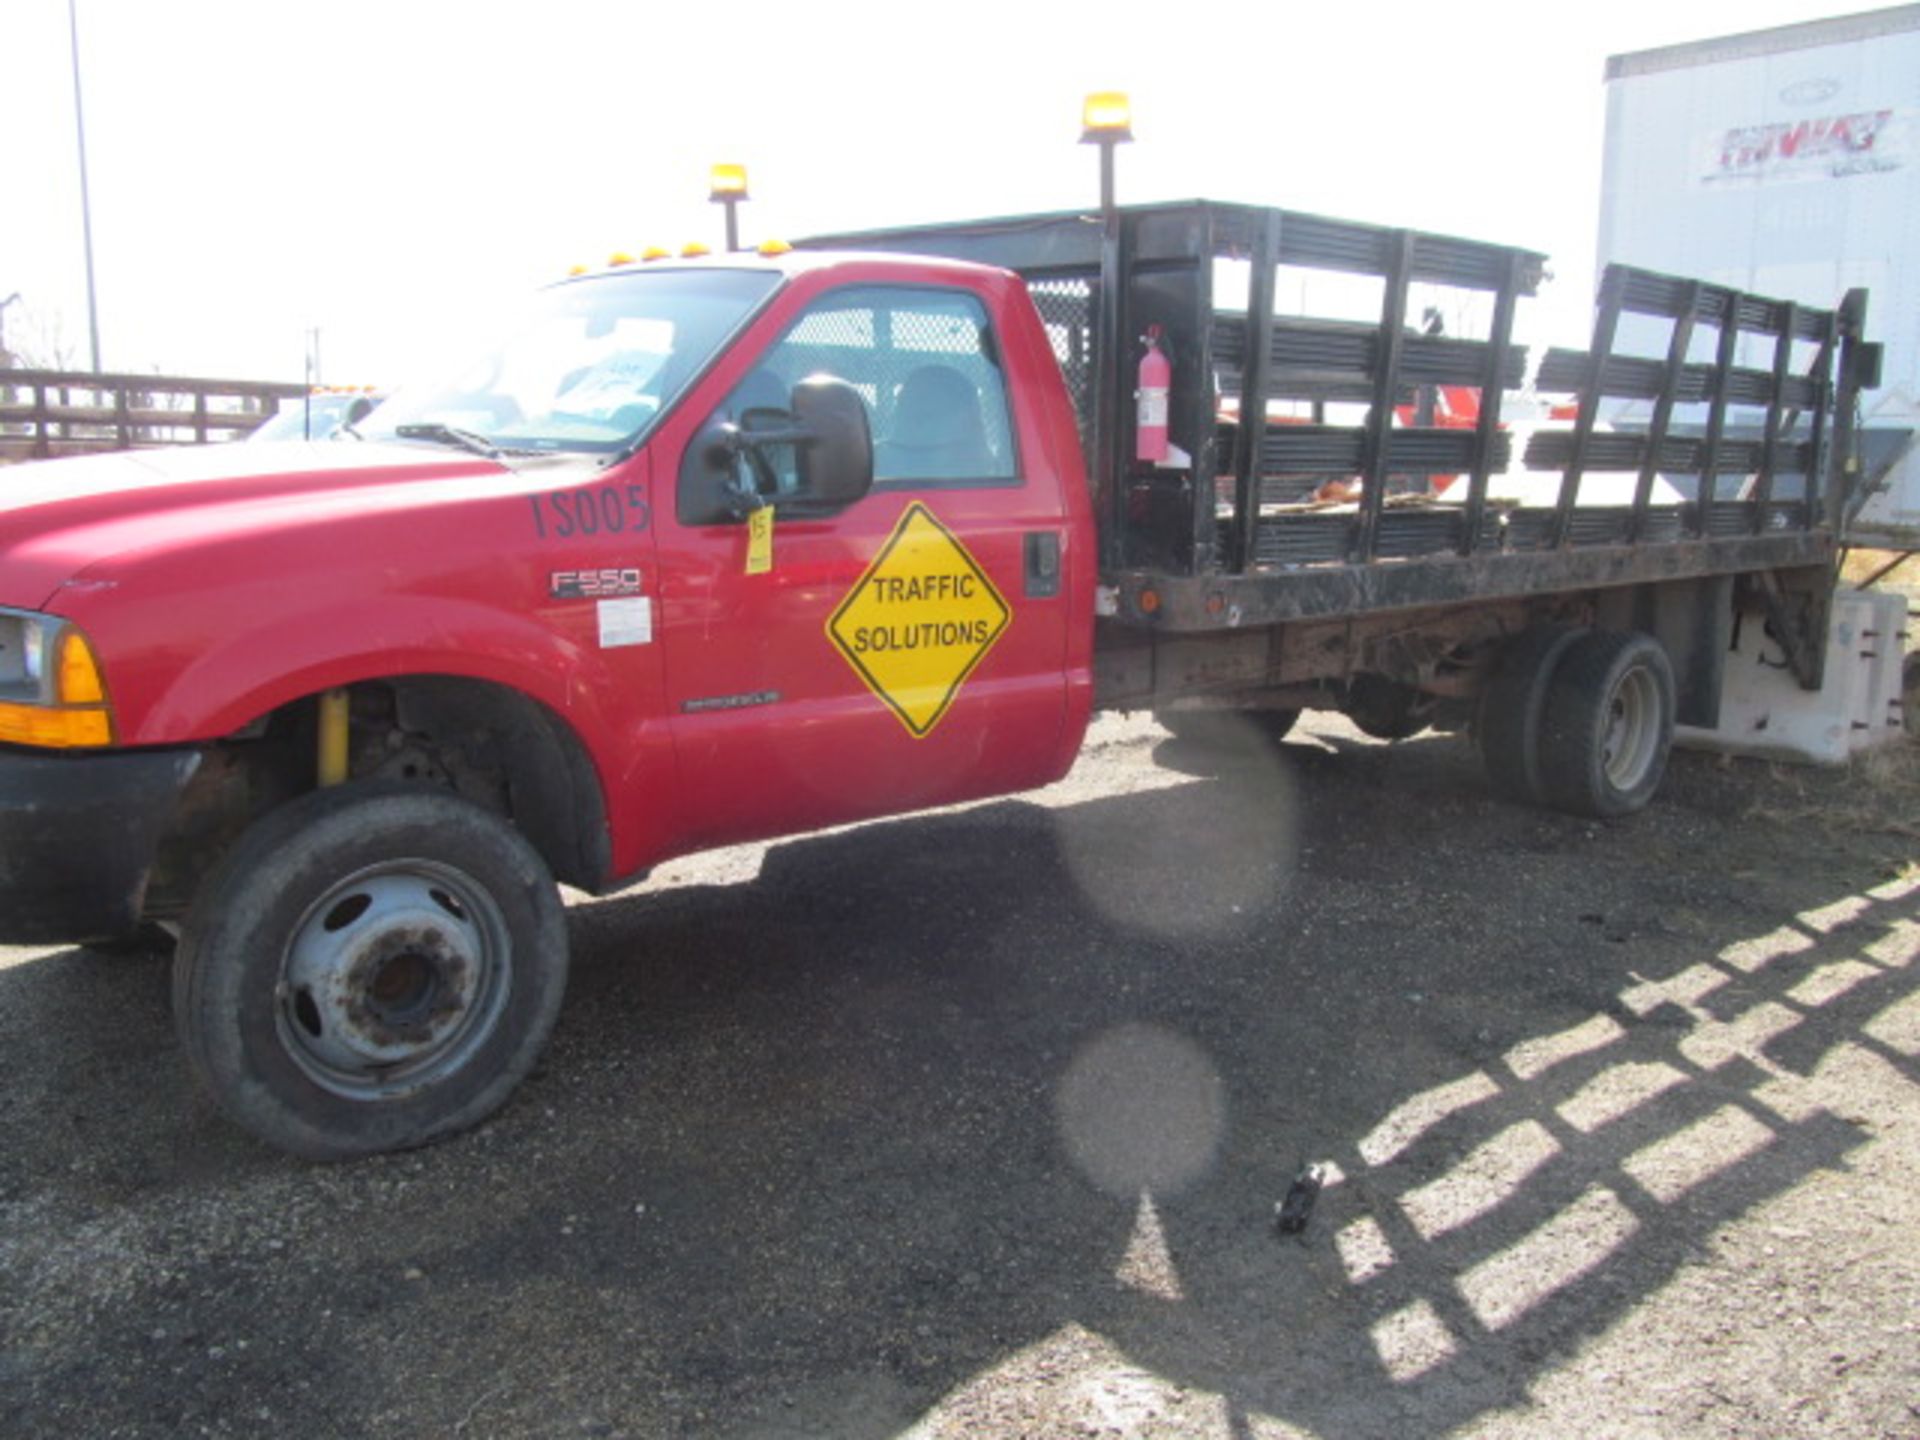 2000 Ford F550 Super Duty Stakebed Truck (VIN: 1FDAF56F3YEA23598)[Estimated Mileage: UNKNOWN - Needs